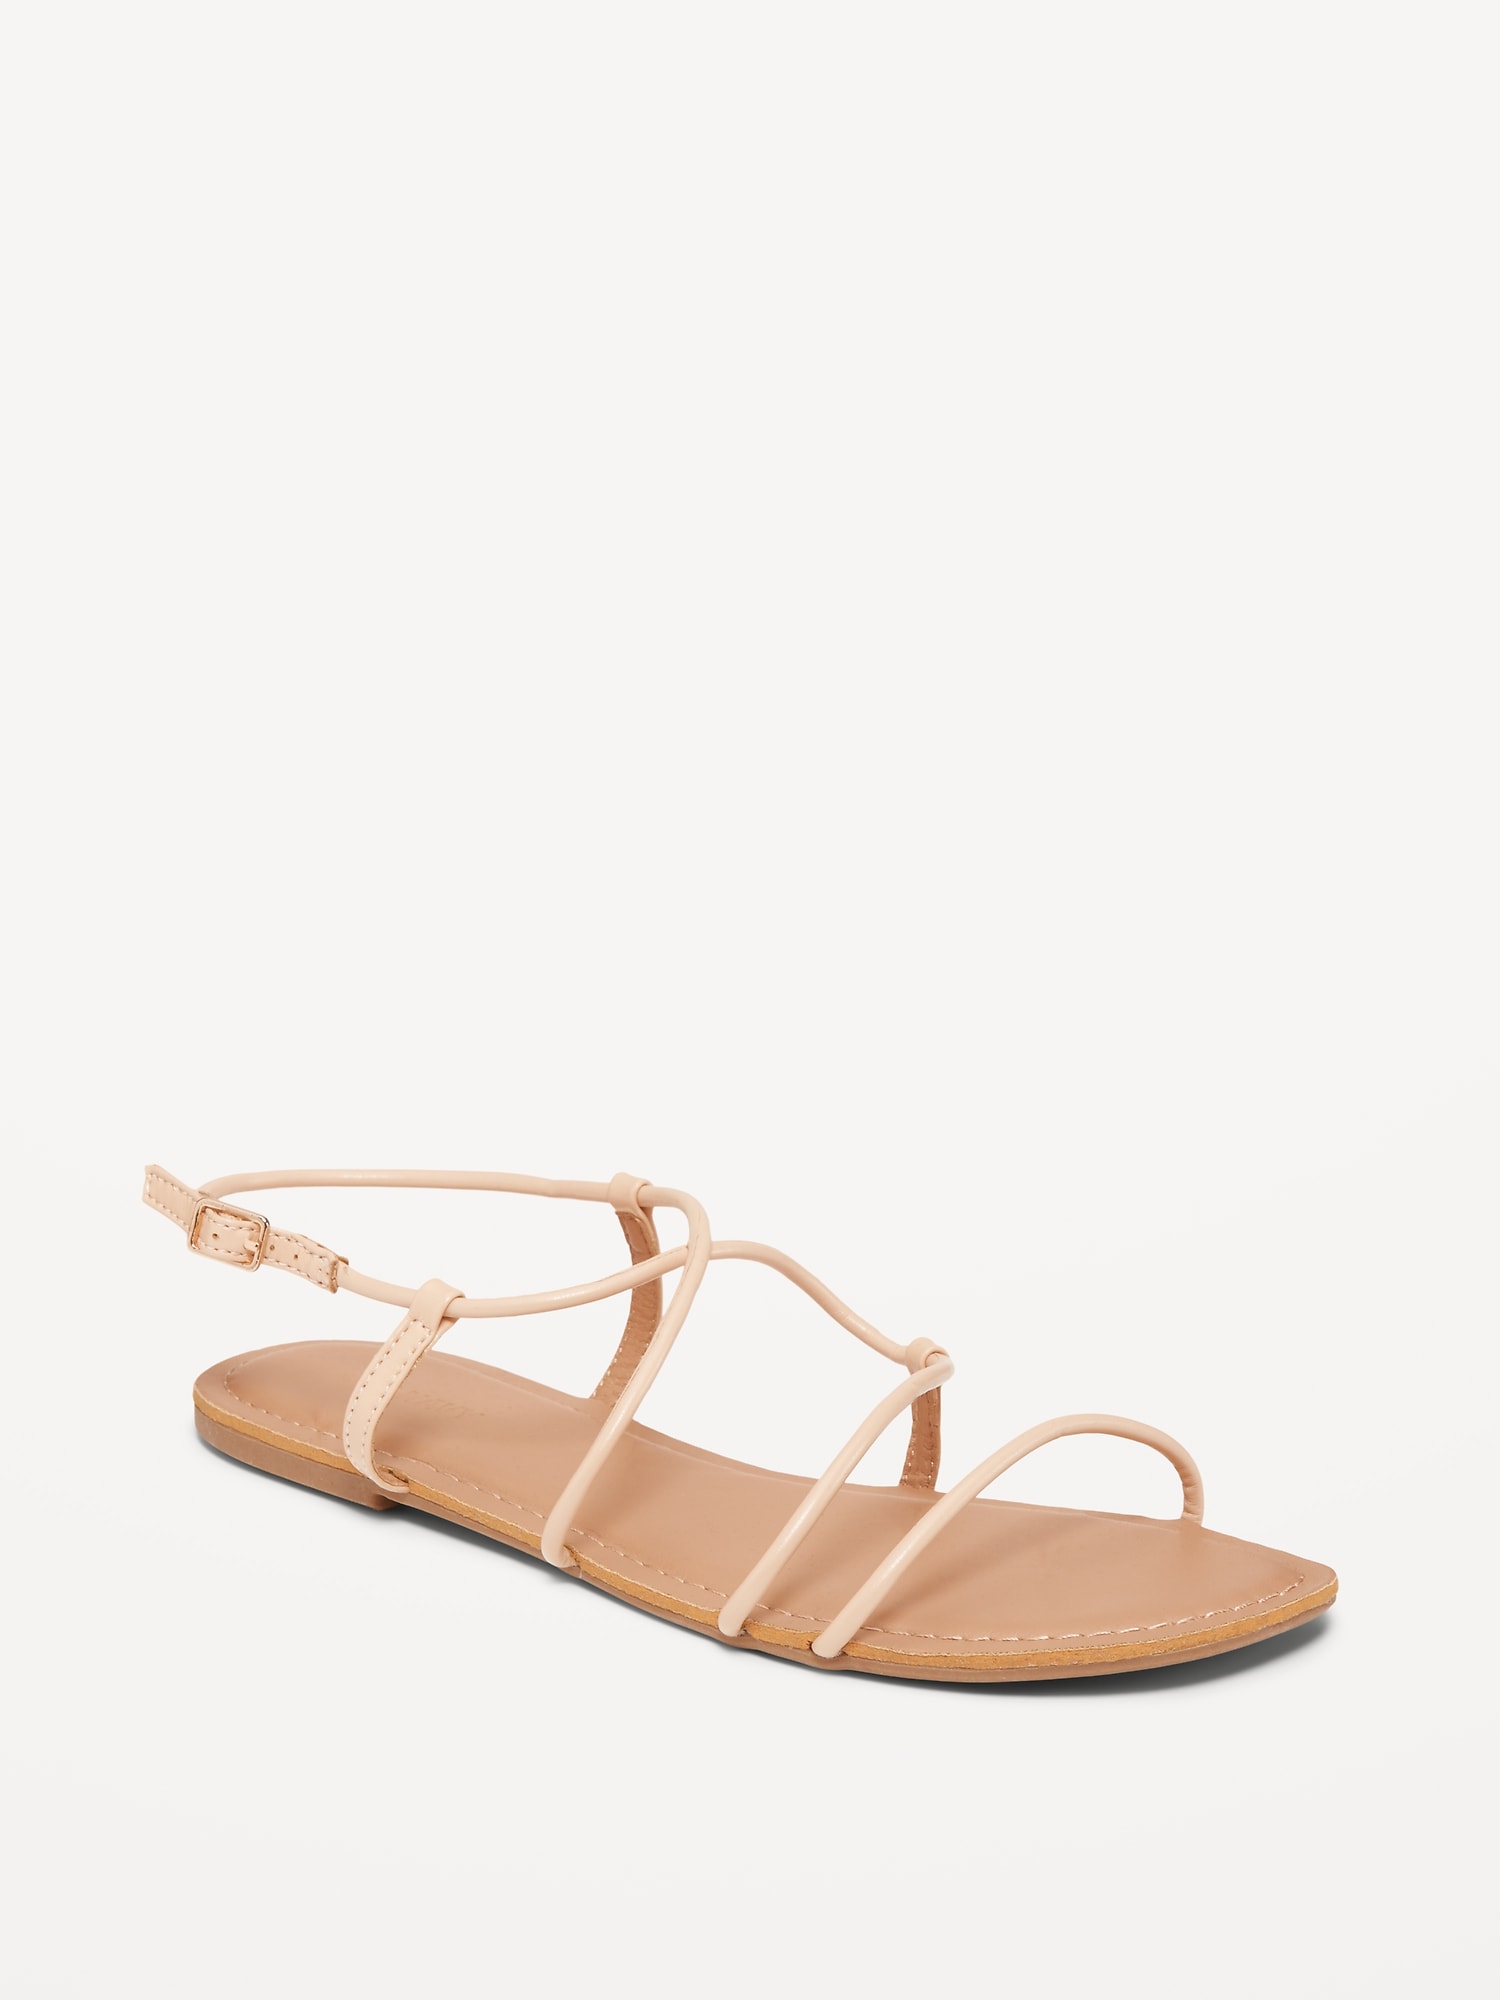 Old Navy Faux-Leather Asymmetric Strappy Sandals for Women beige. 1